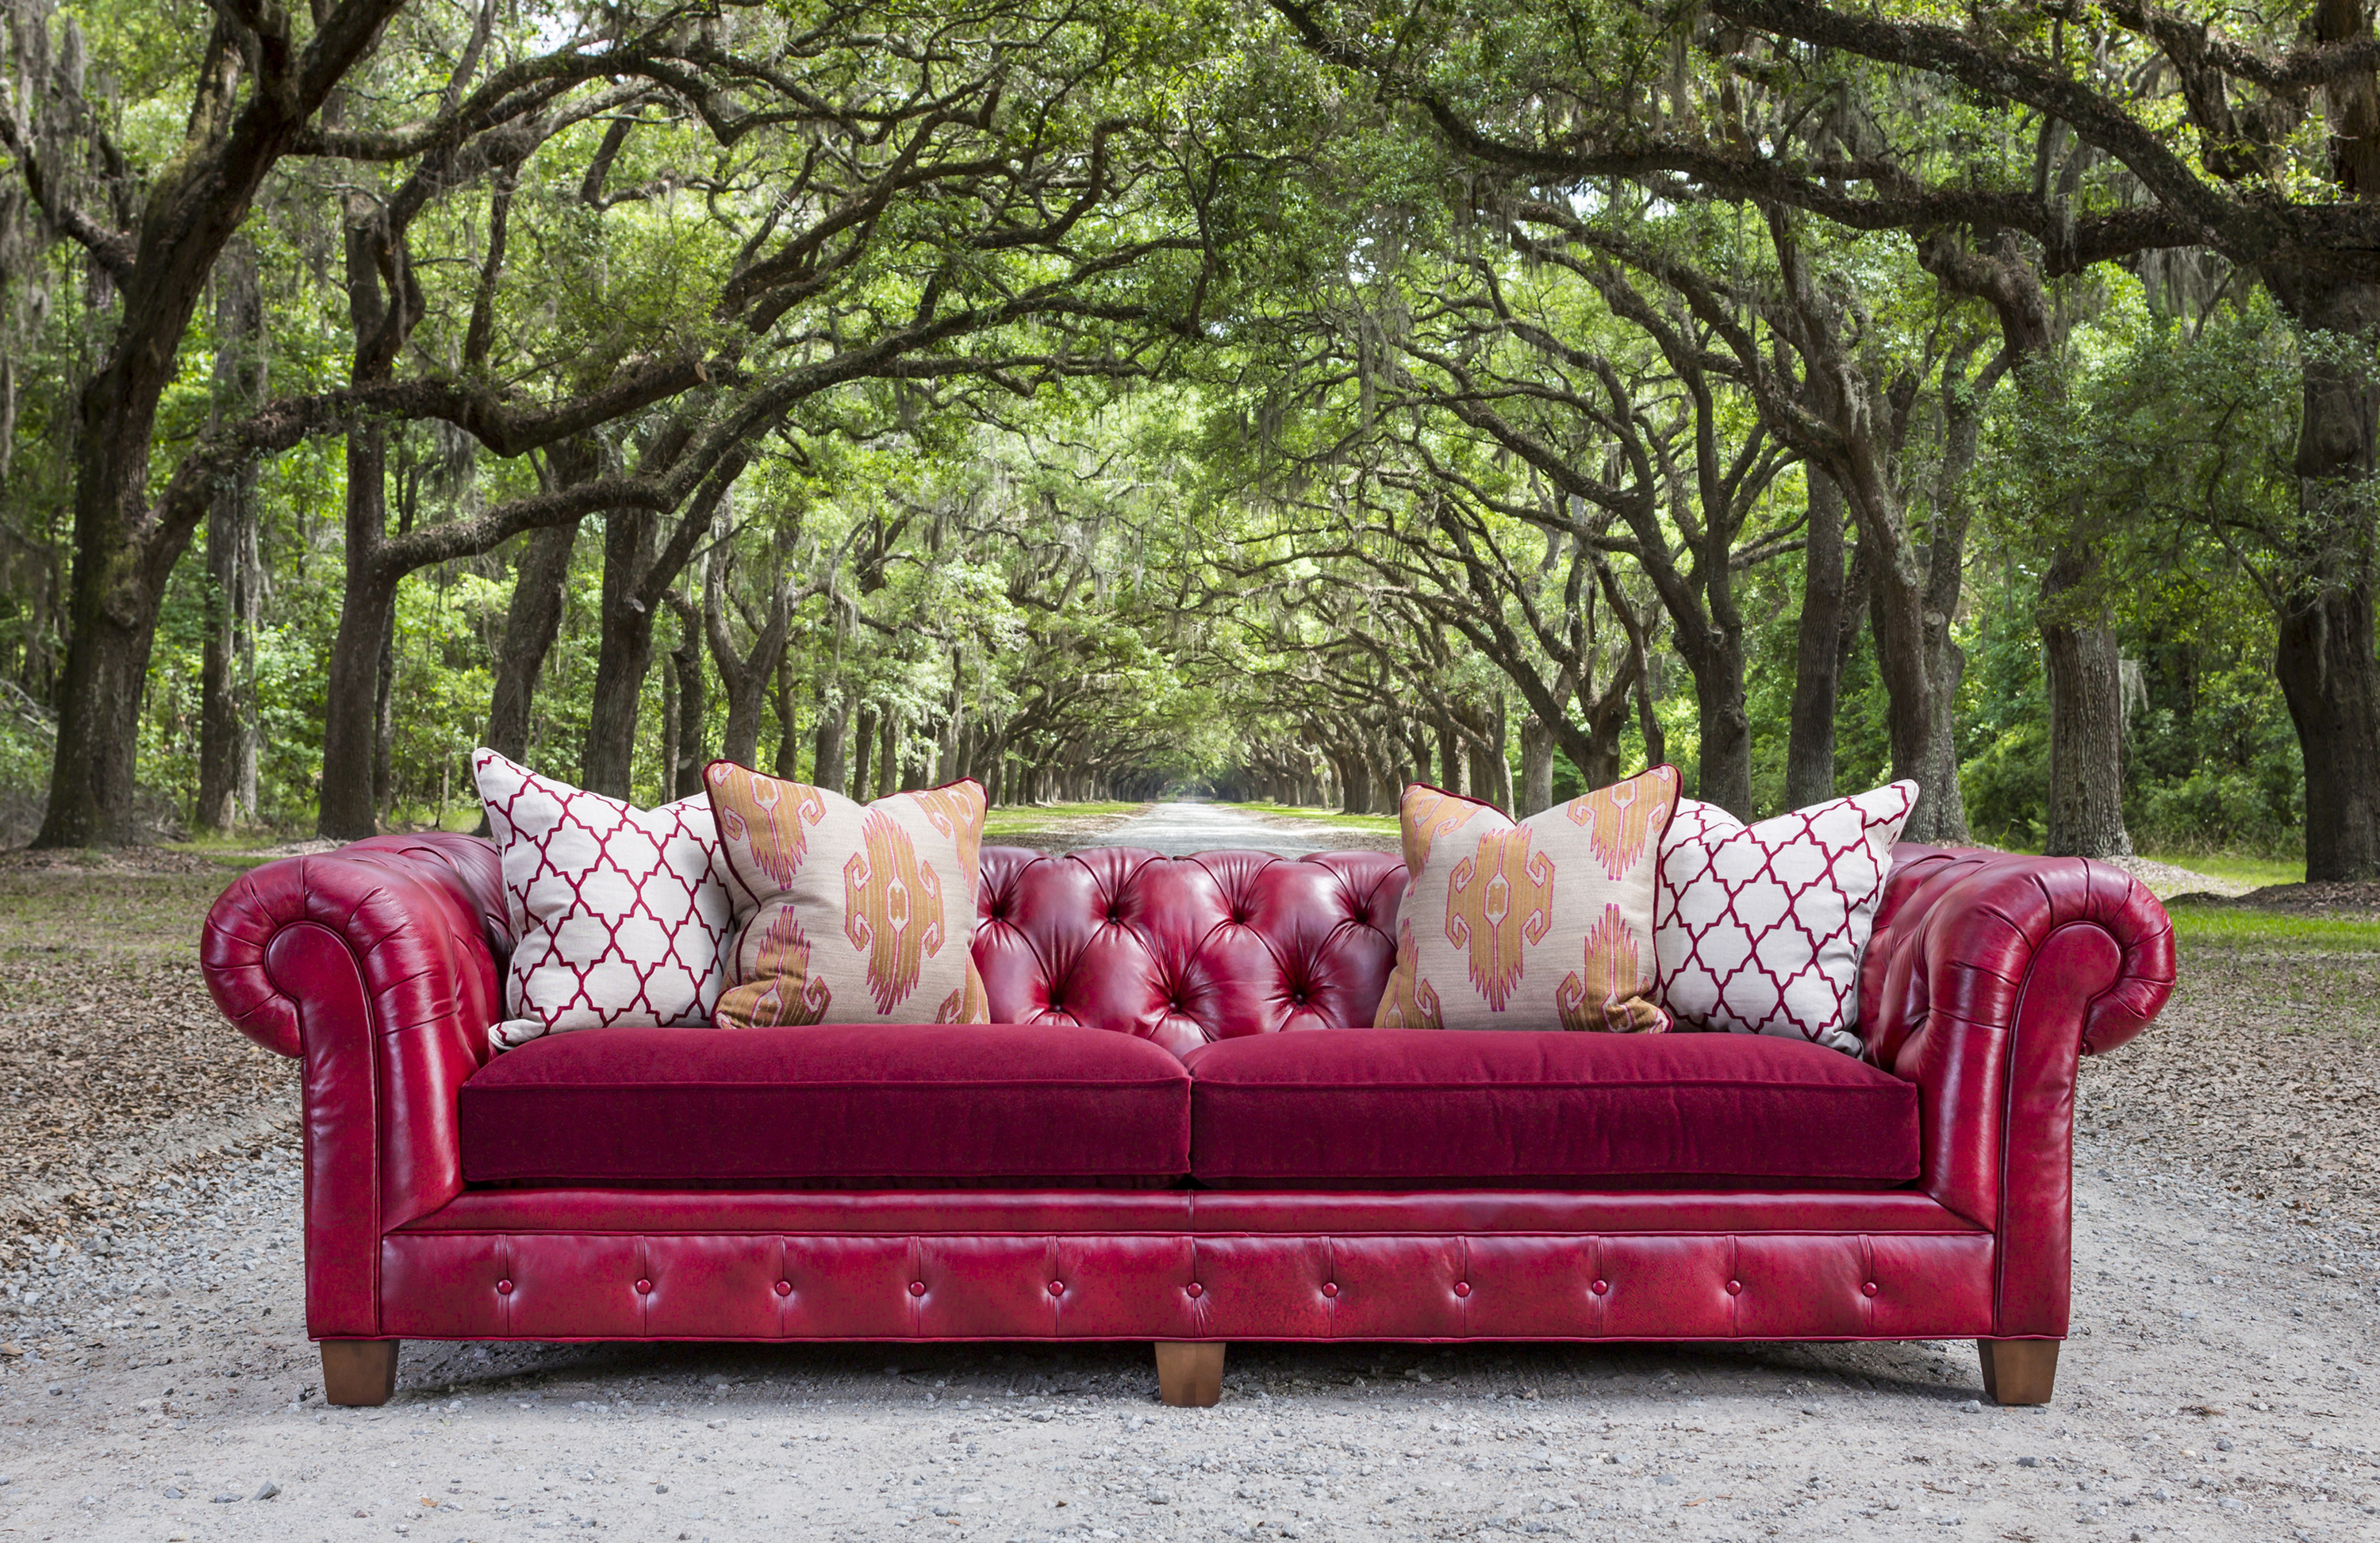 red leather chesterfield sofa with red cloth cushions photographed on a dirt road with a tree canopy arching over